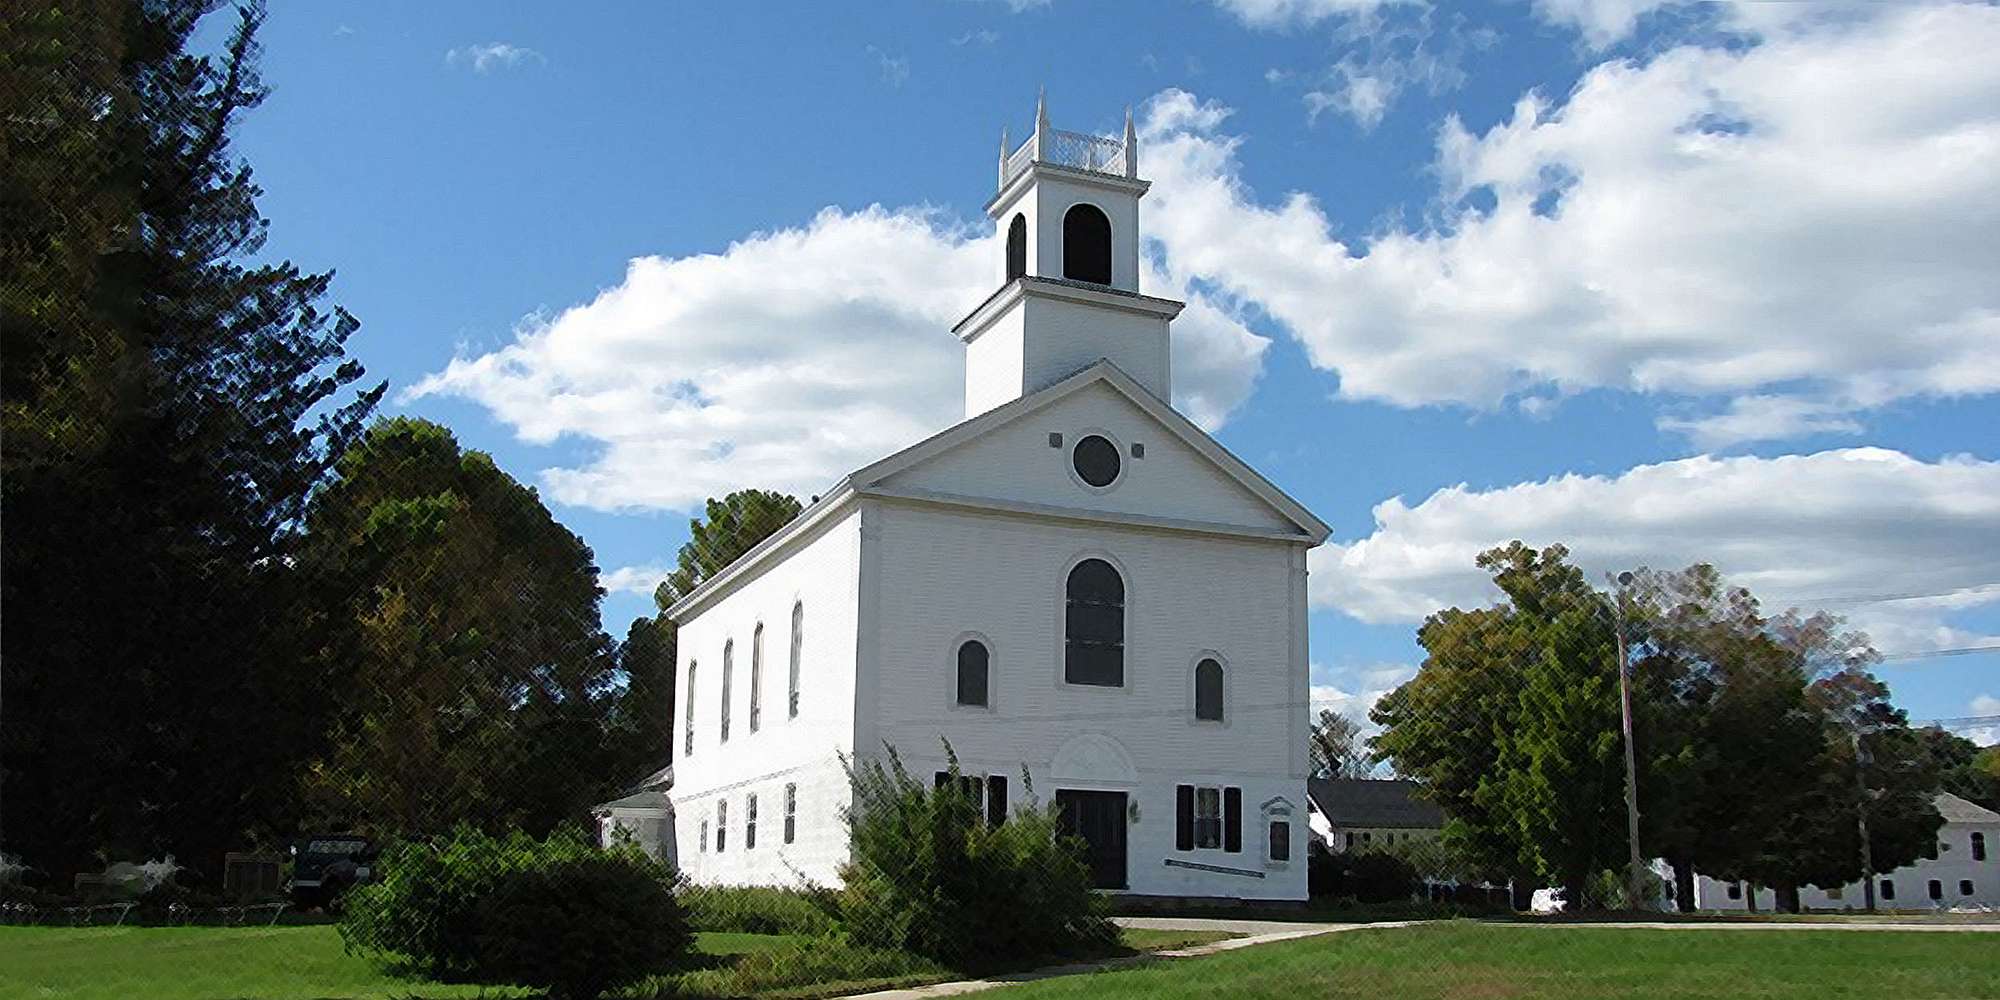 Photo of the Baptist Church in Swanzey, New Hampshire